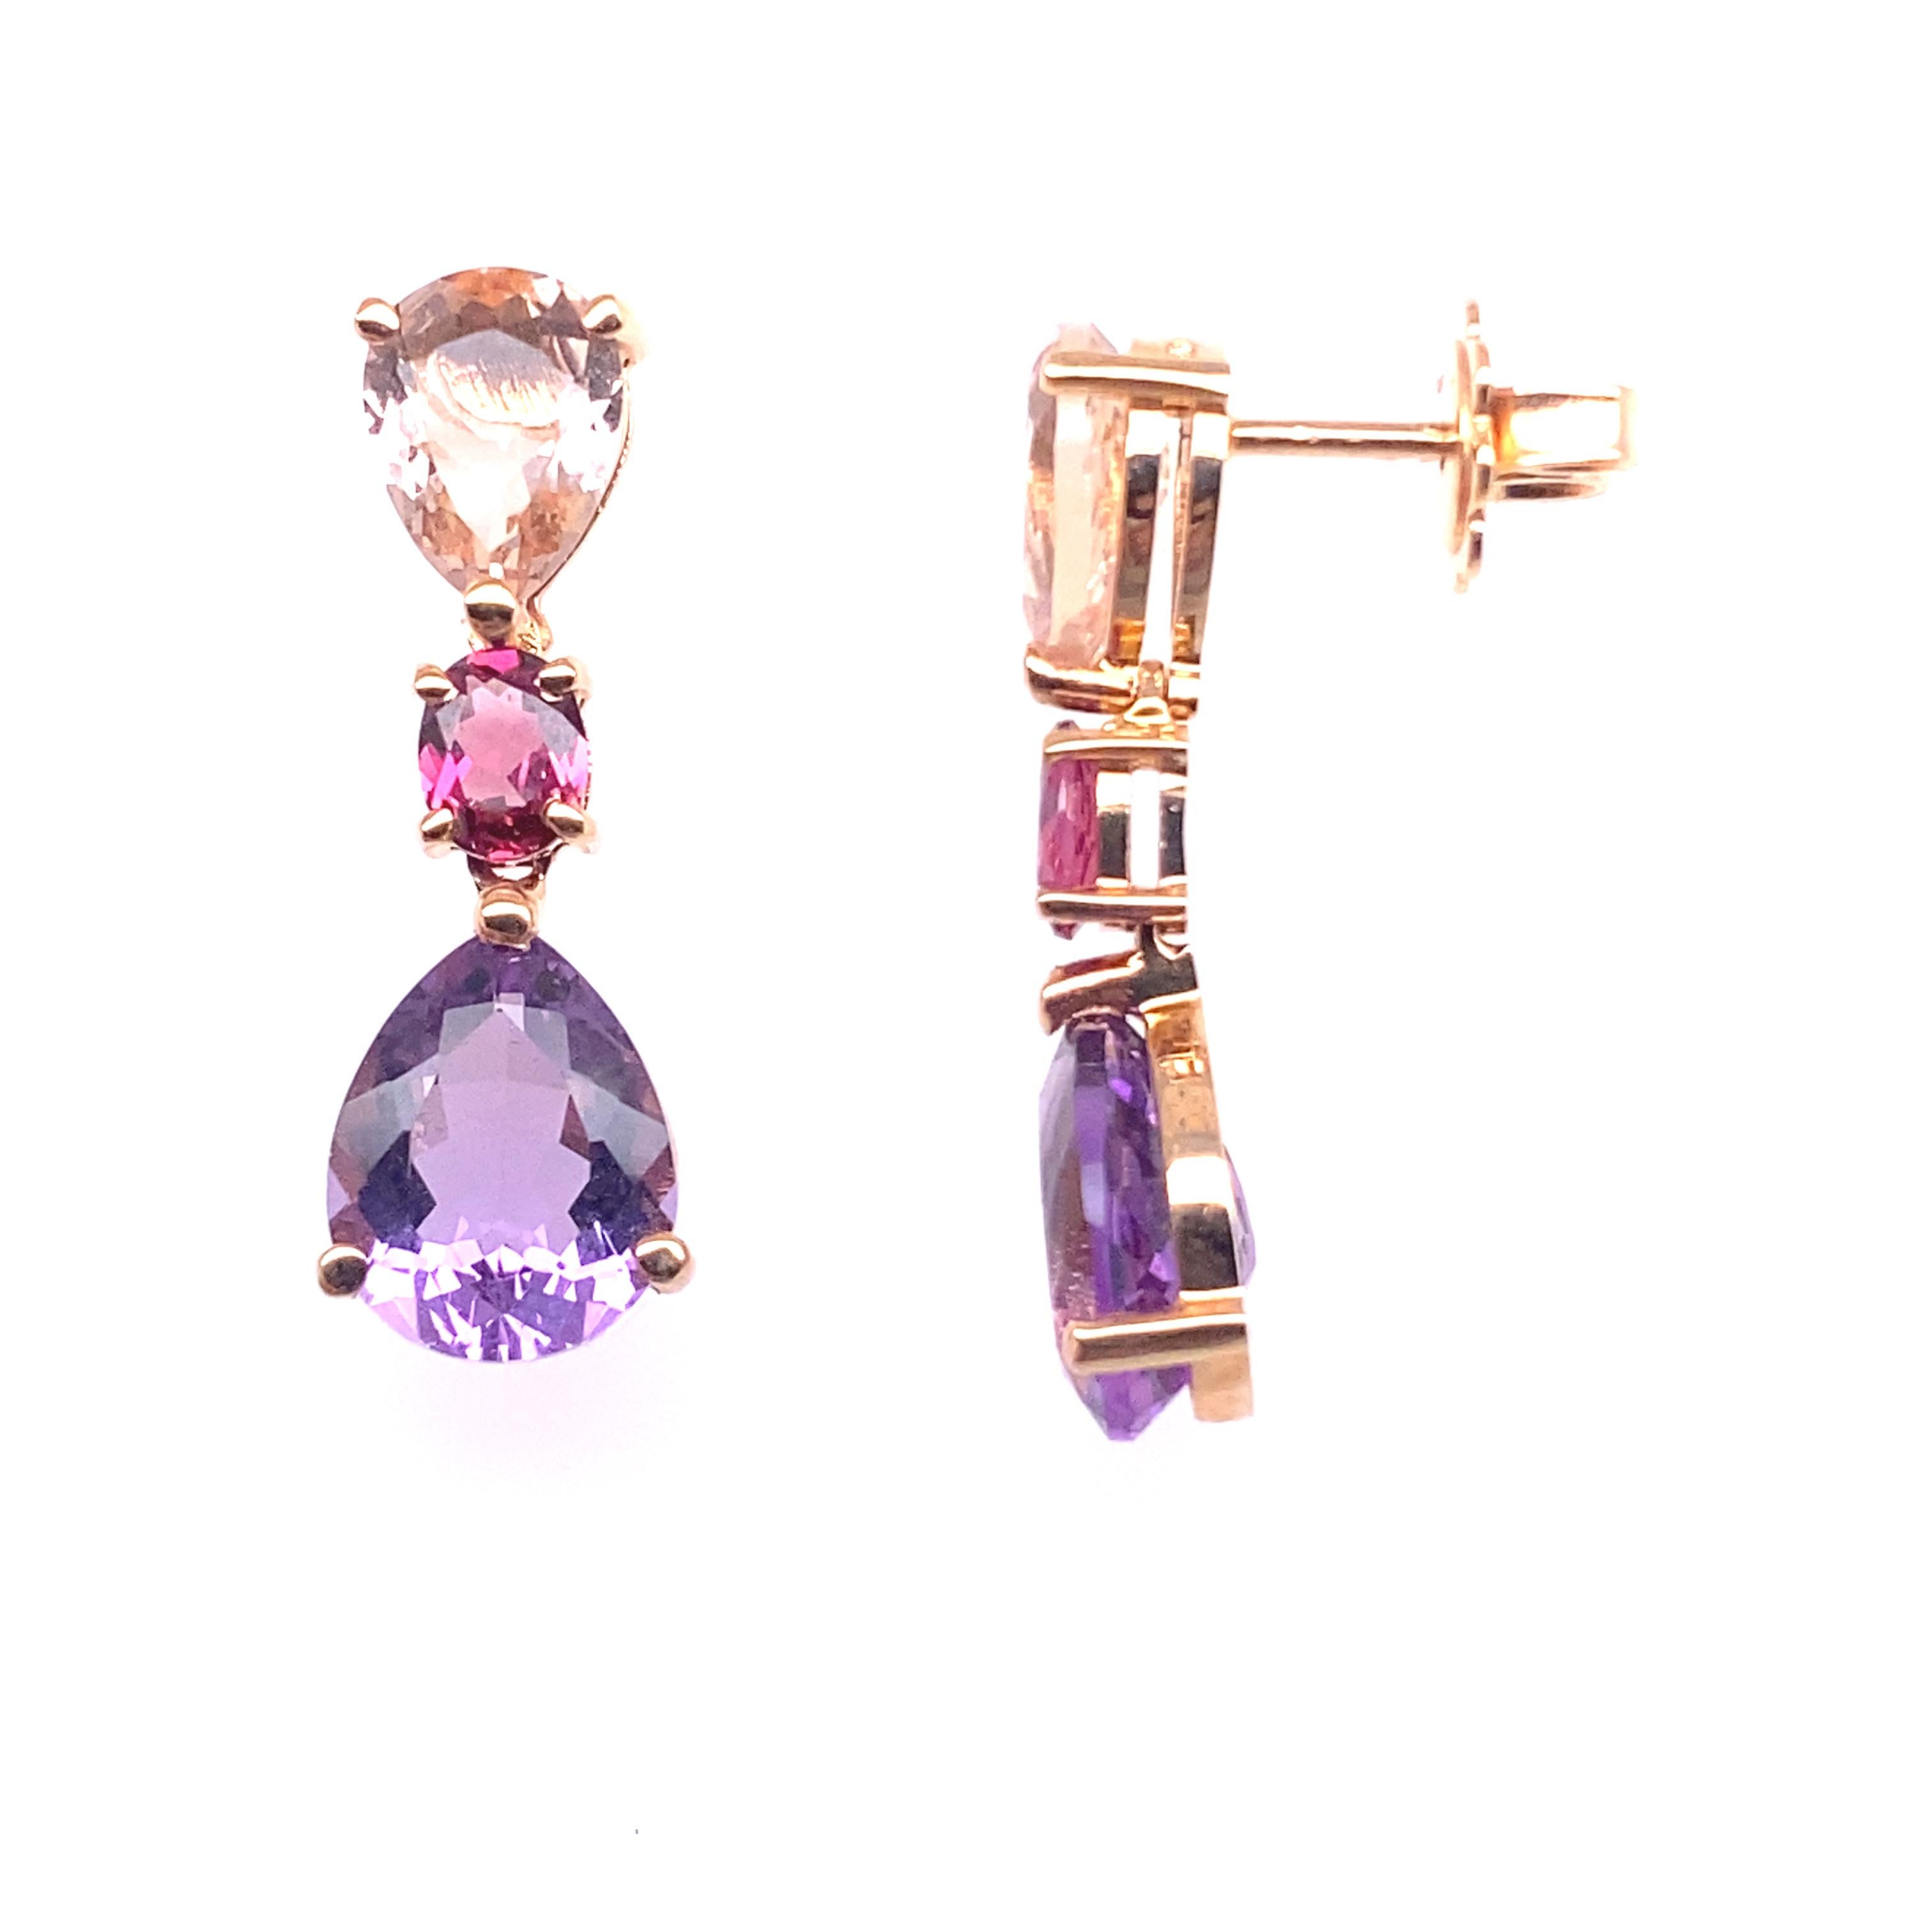 Discover sumptuous gold earrings with amethyst, beryl and rodholite, created with the greatest care in the French collection of Mesure et Art du Temps. Compliant with 1st Dibs listing criteria, these earrings are a true expression of elegance and